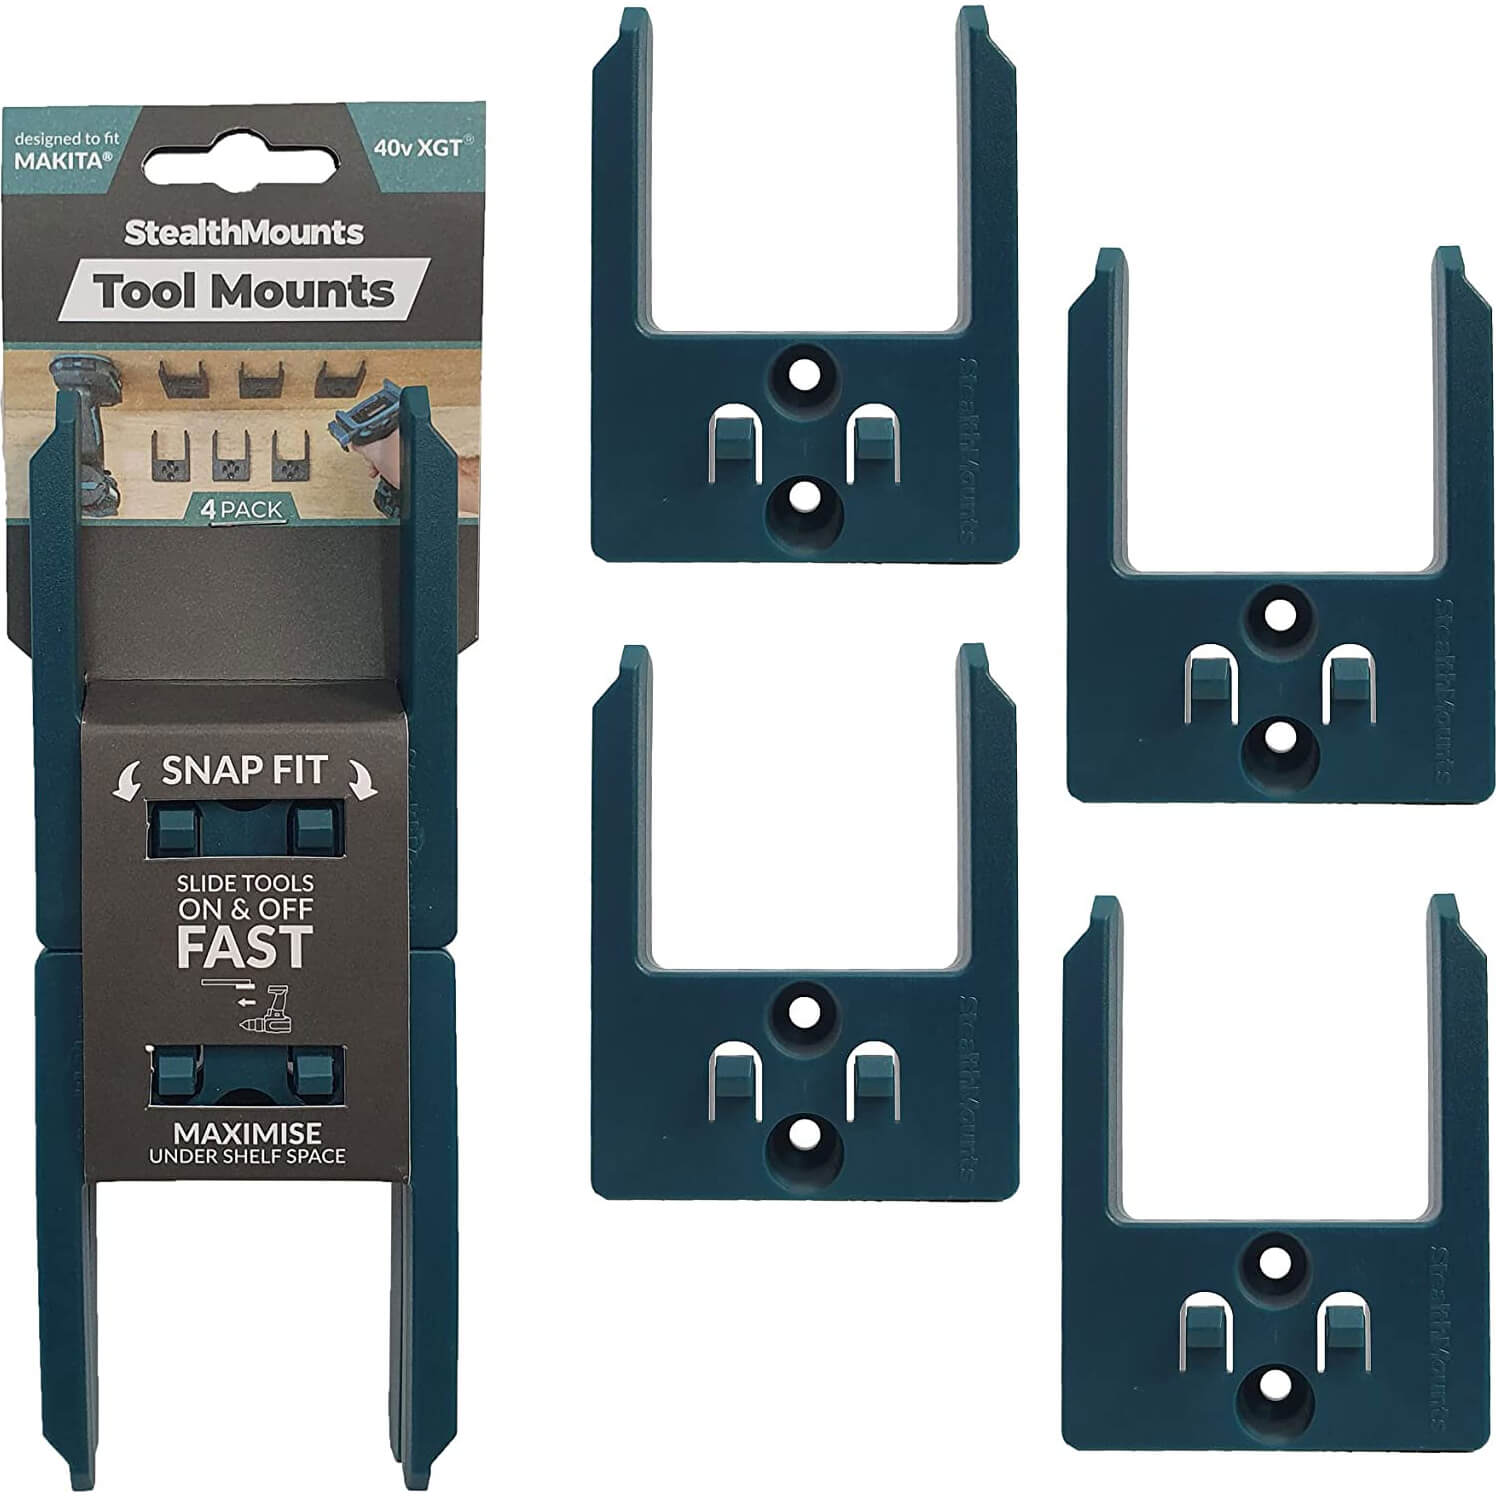 Image of Stealth Mounts 4 Pack Tool Mounts For Makita 40V XGT Tools Blue